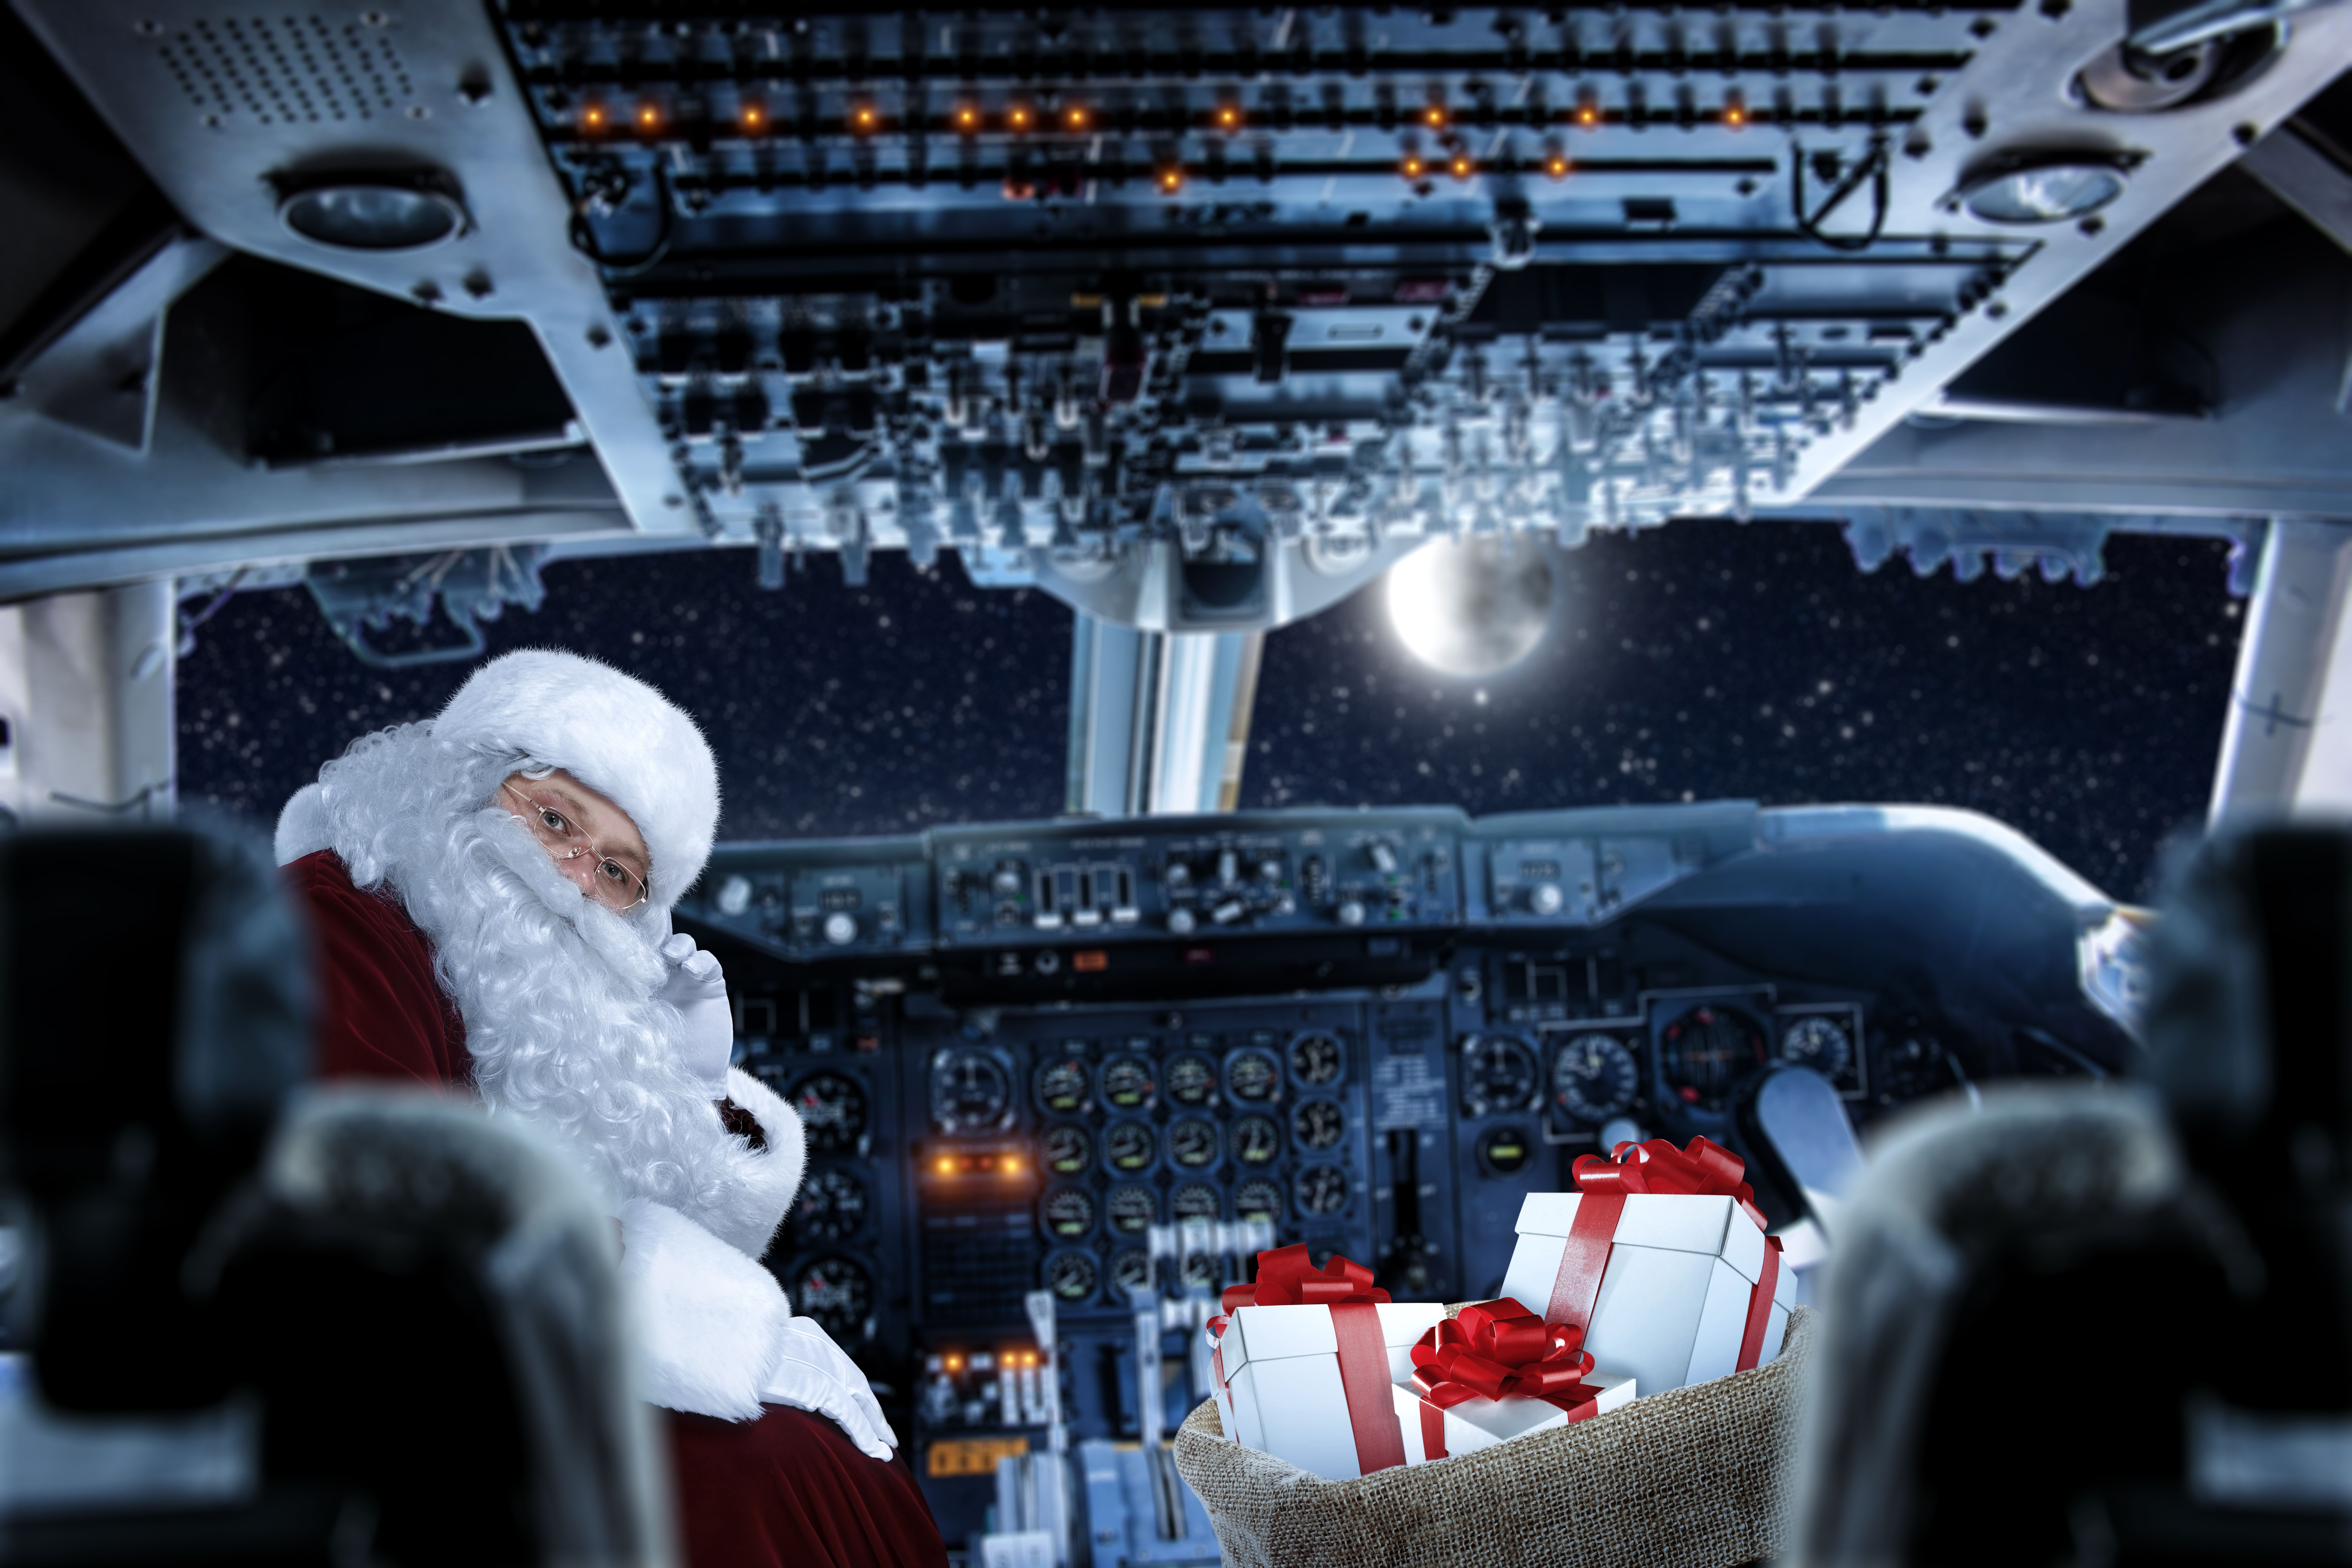 A photoshopped image of Santa in an aircraft cockpit with gifts.